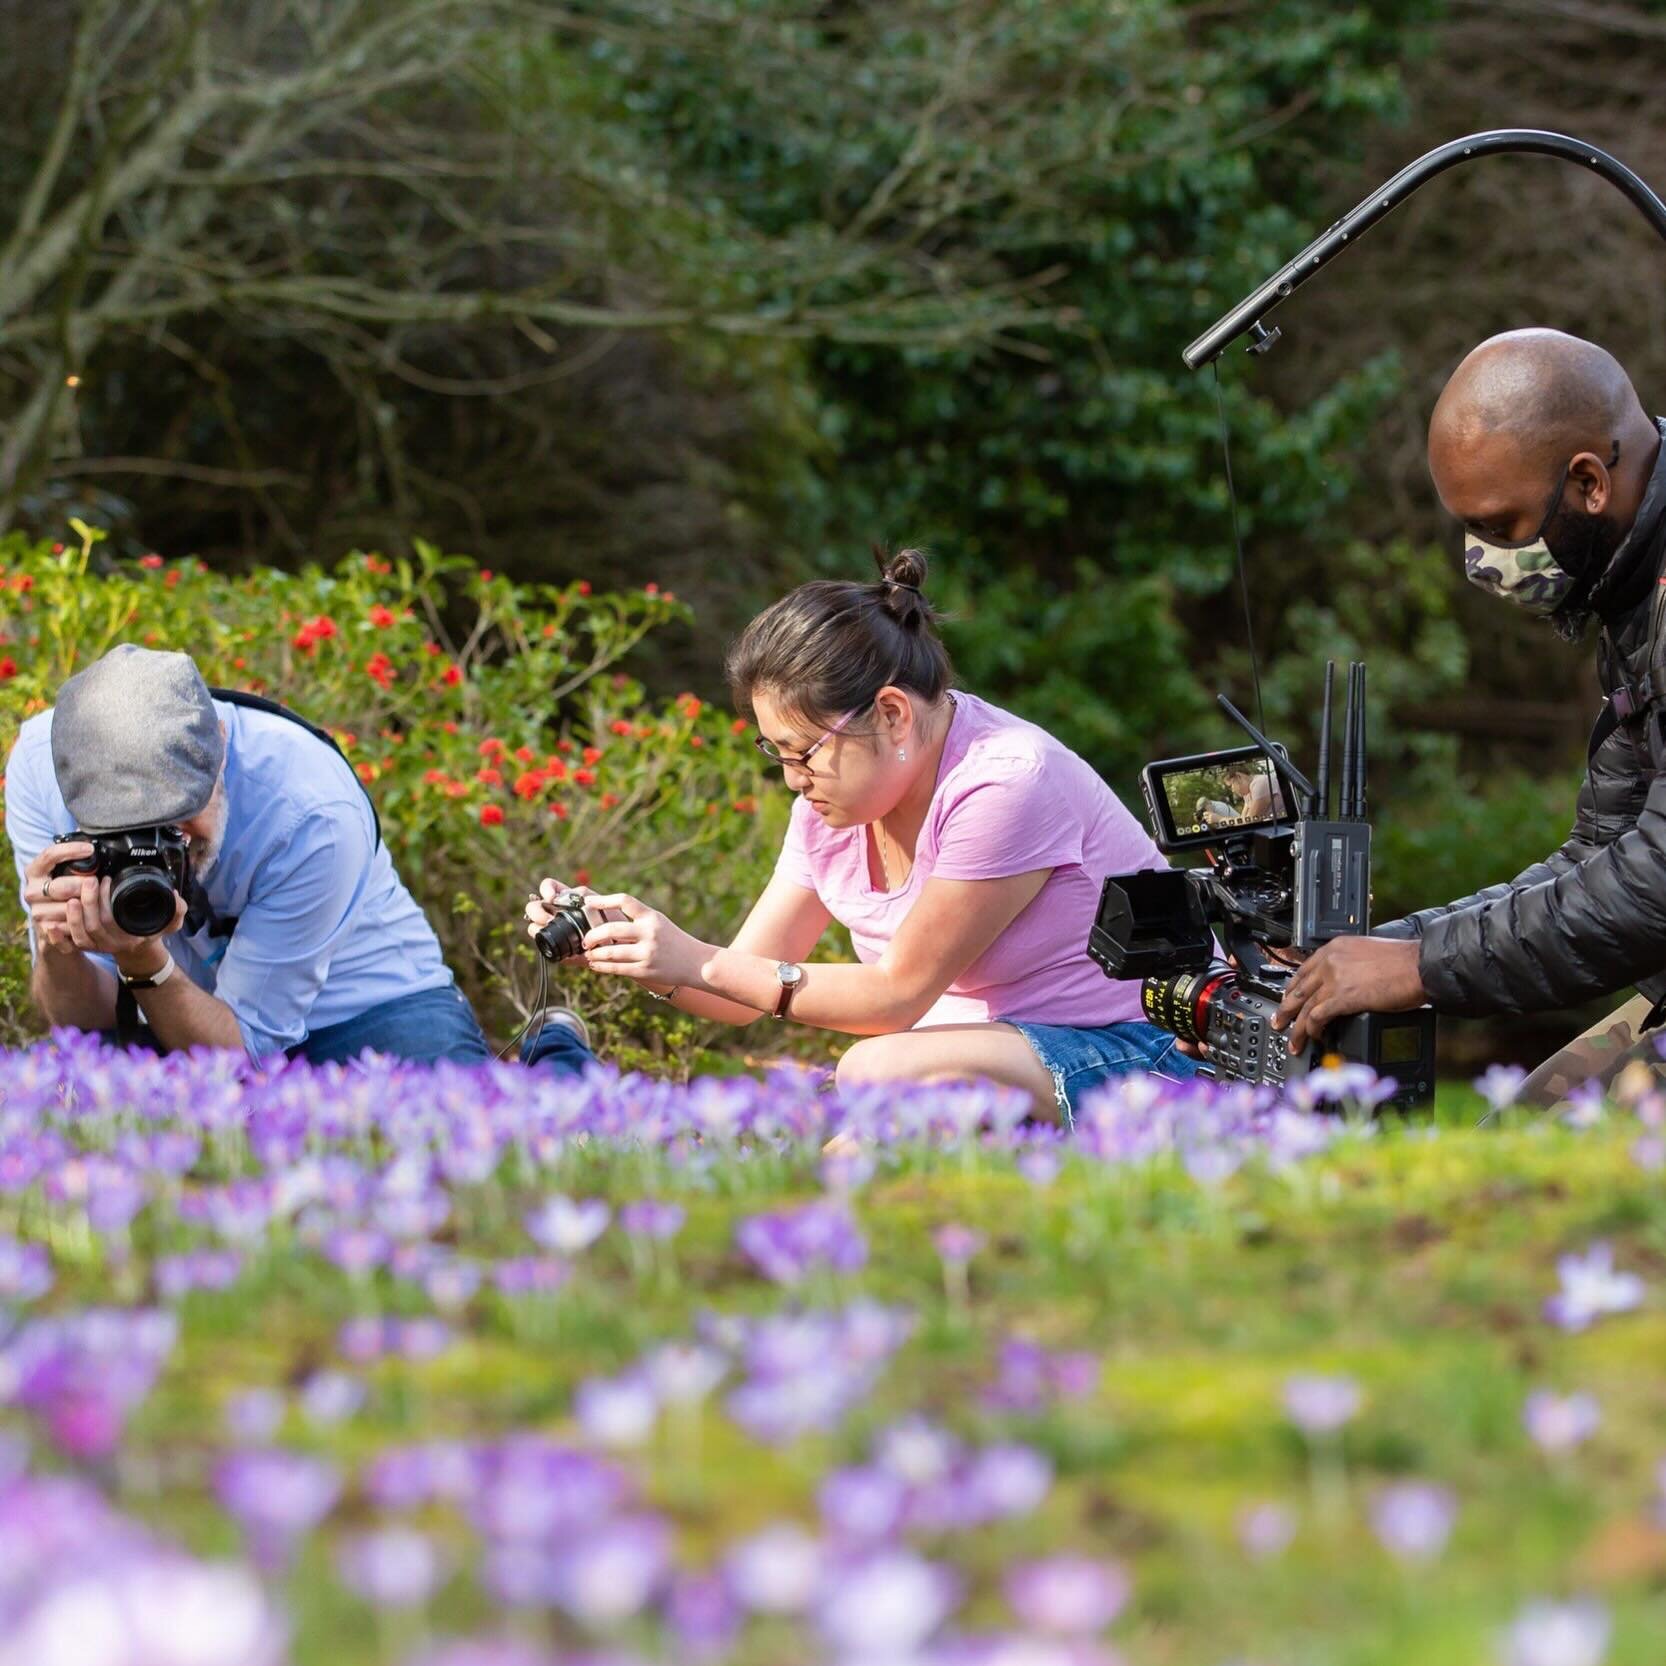 Picture this: a photography student eagerly learning the art of capturing beauty from her teacher amidst a garden of vibrant flowers. Meanwhile, we are there, filming the magic as it unfolds.

In this moment, it&rsquo;s not just about reading the sto